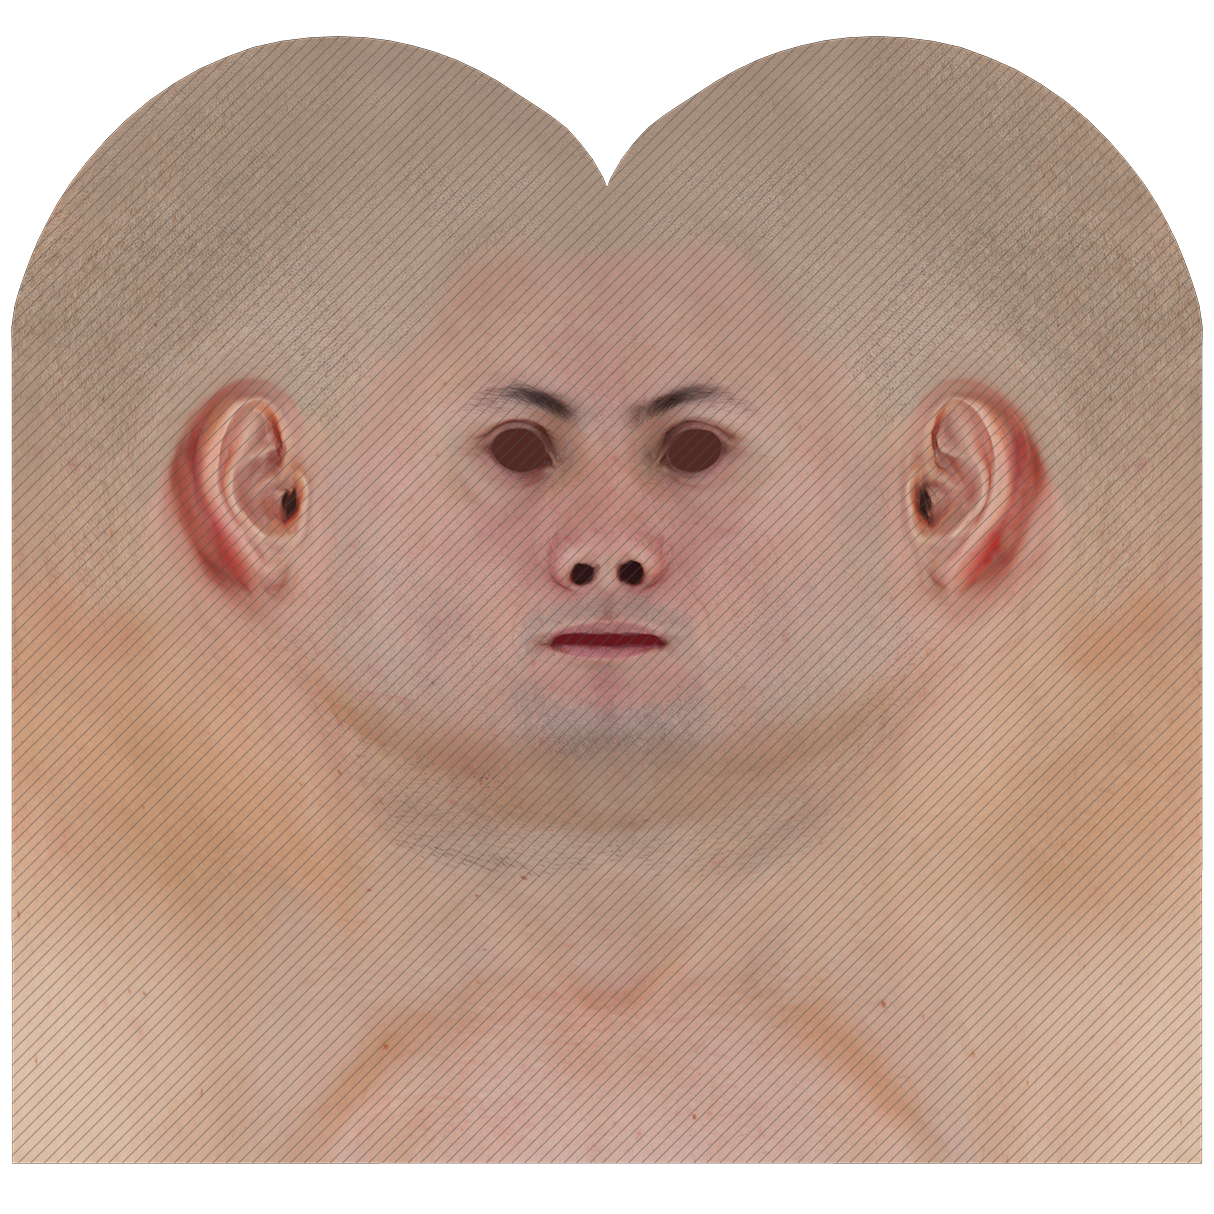 Male head texture map 24